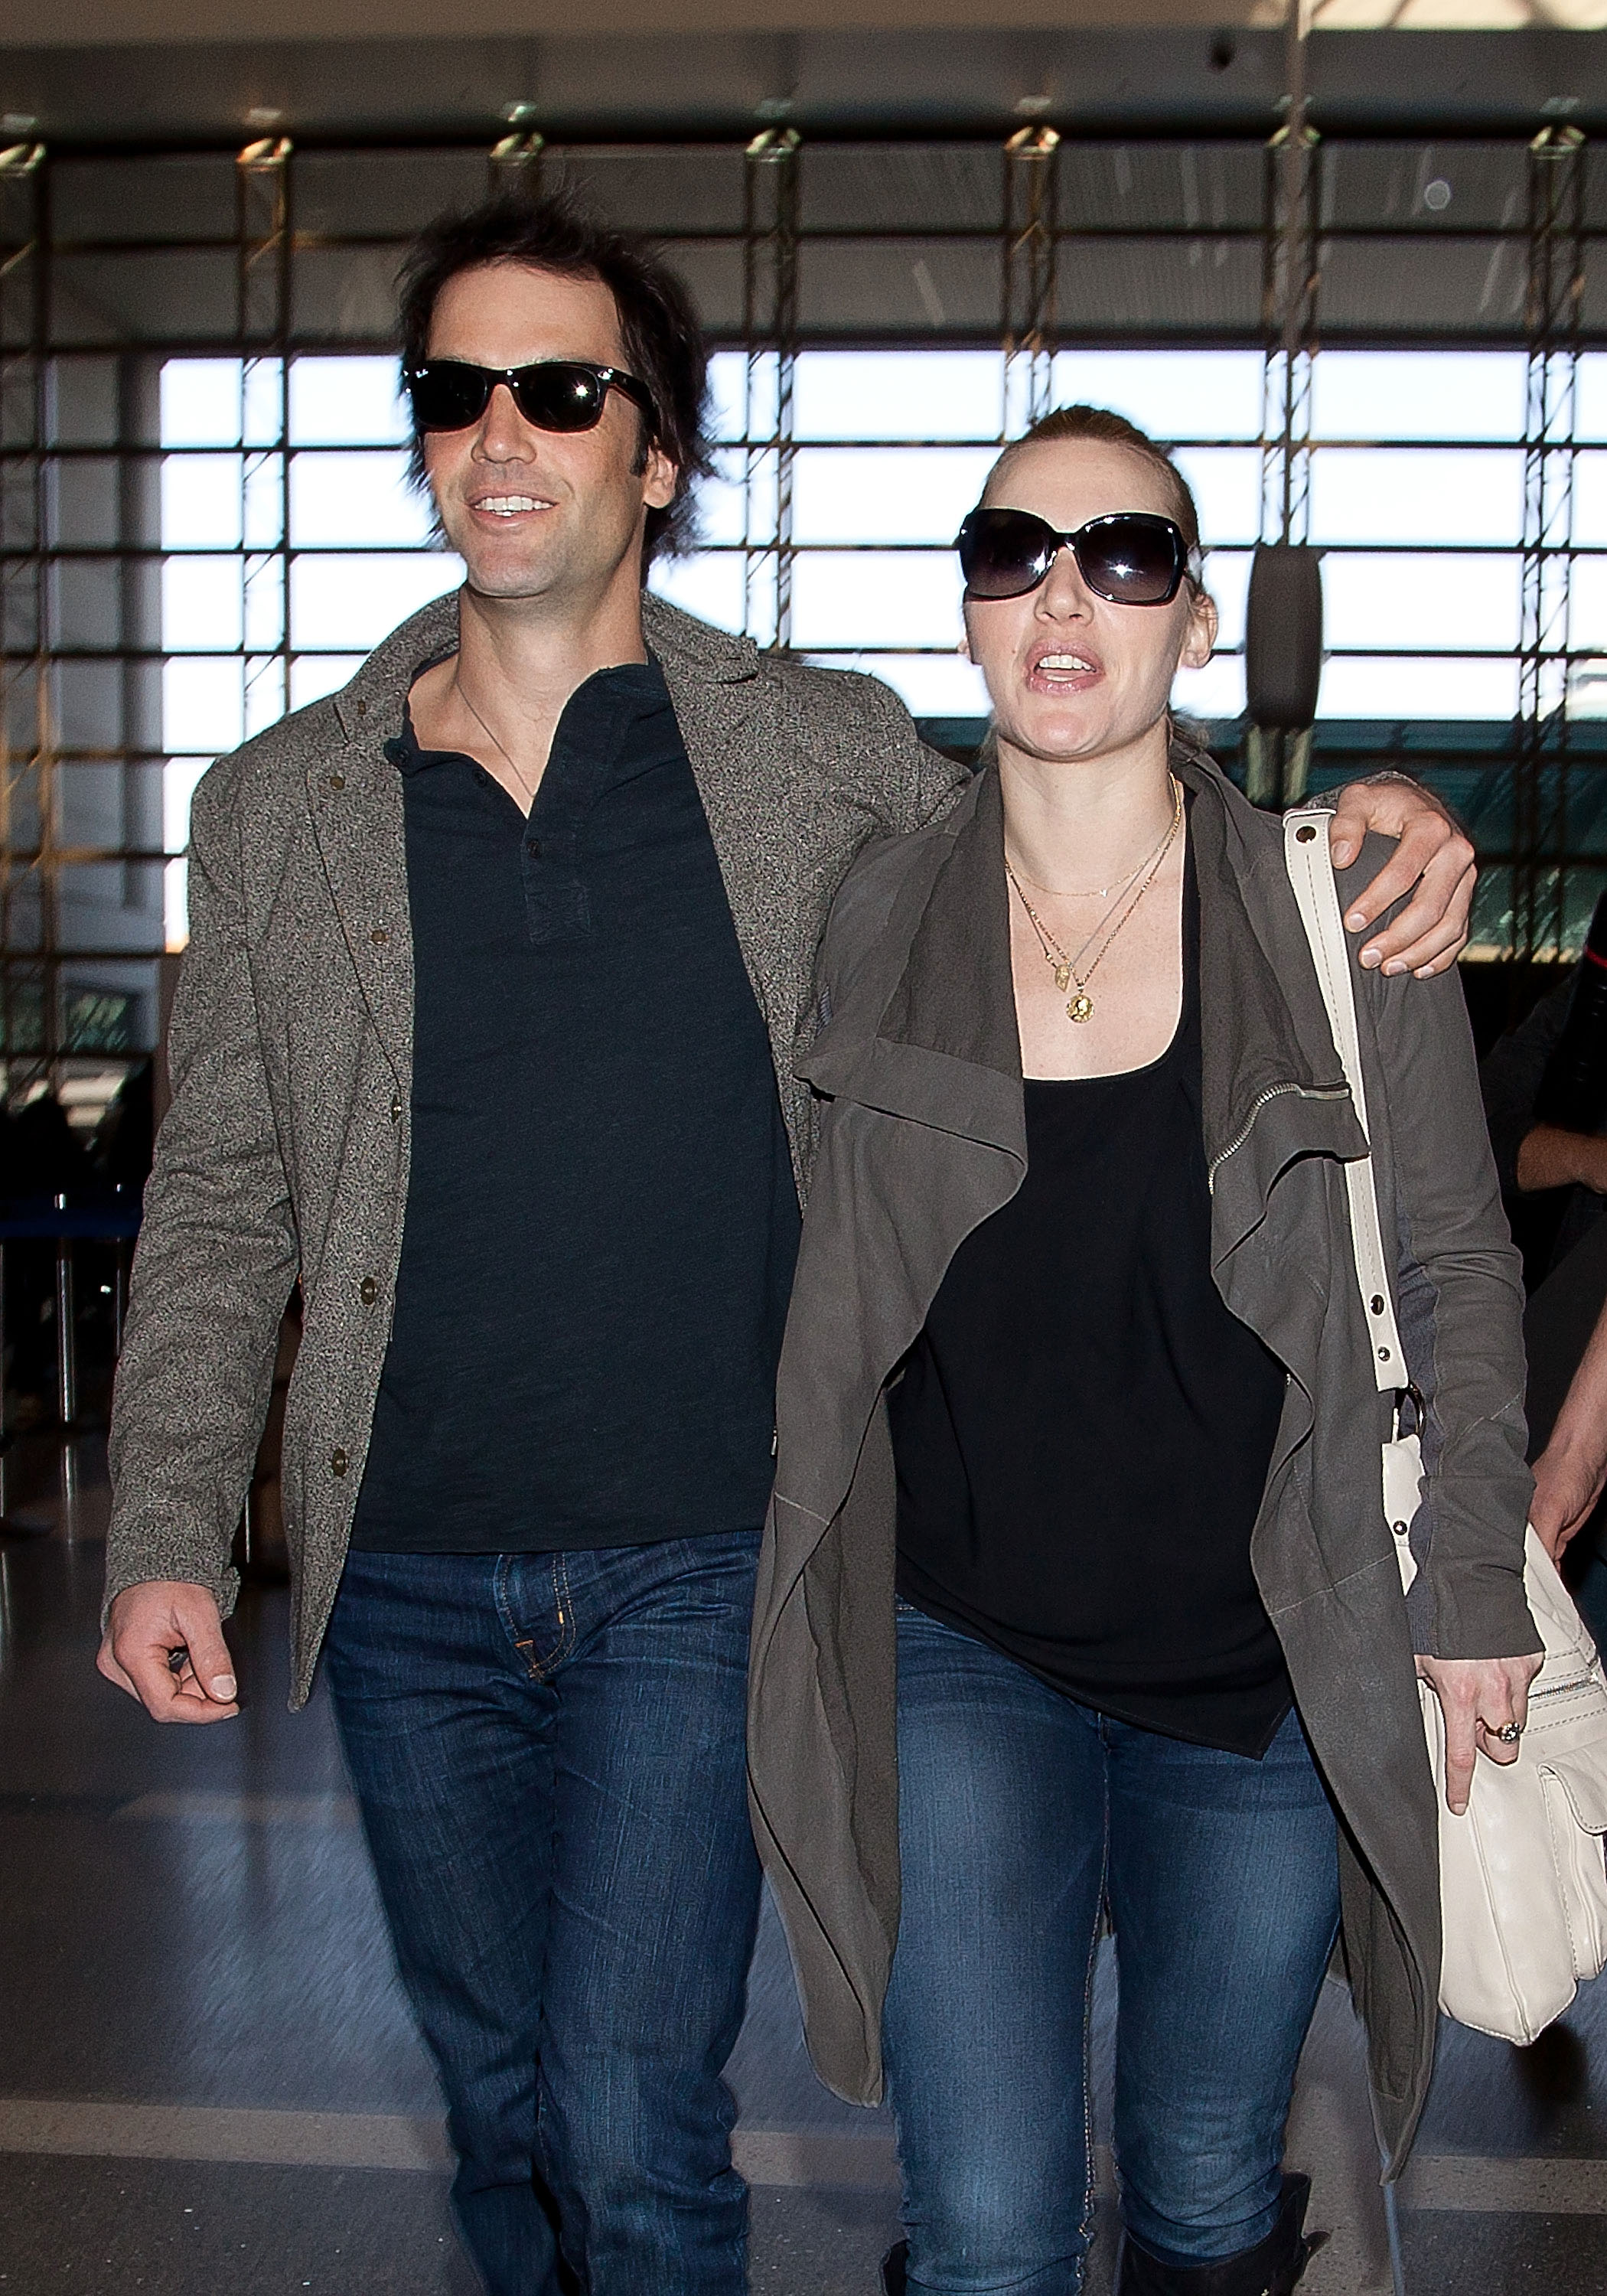 Kate Winslet and Edward Abel Smith are seen at Los Angeles International Airport on January 16, 2012 in Los Angeles, California ┃Source: Getty Images